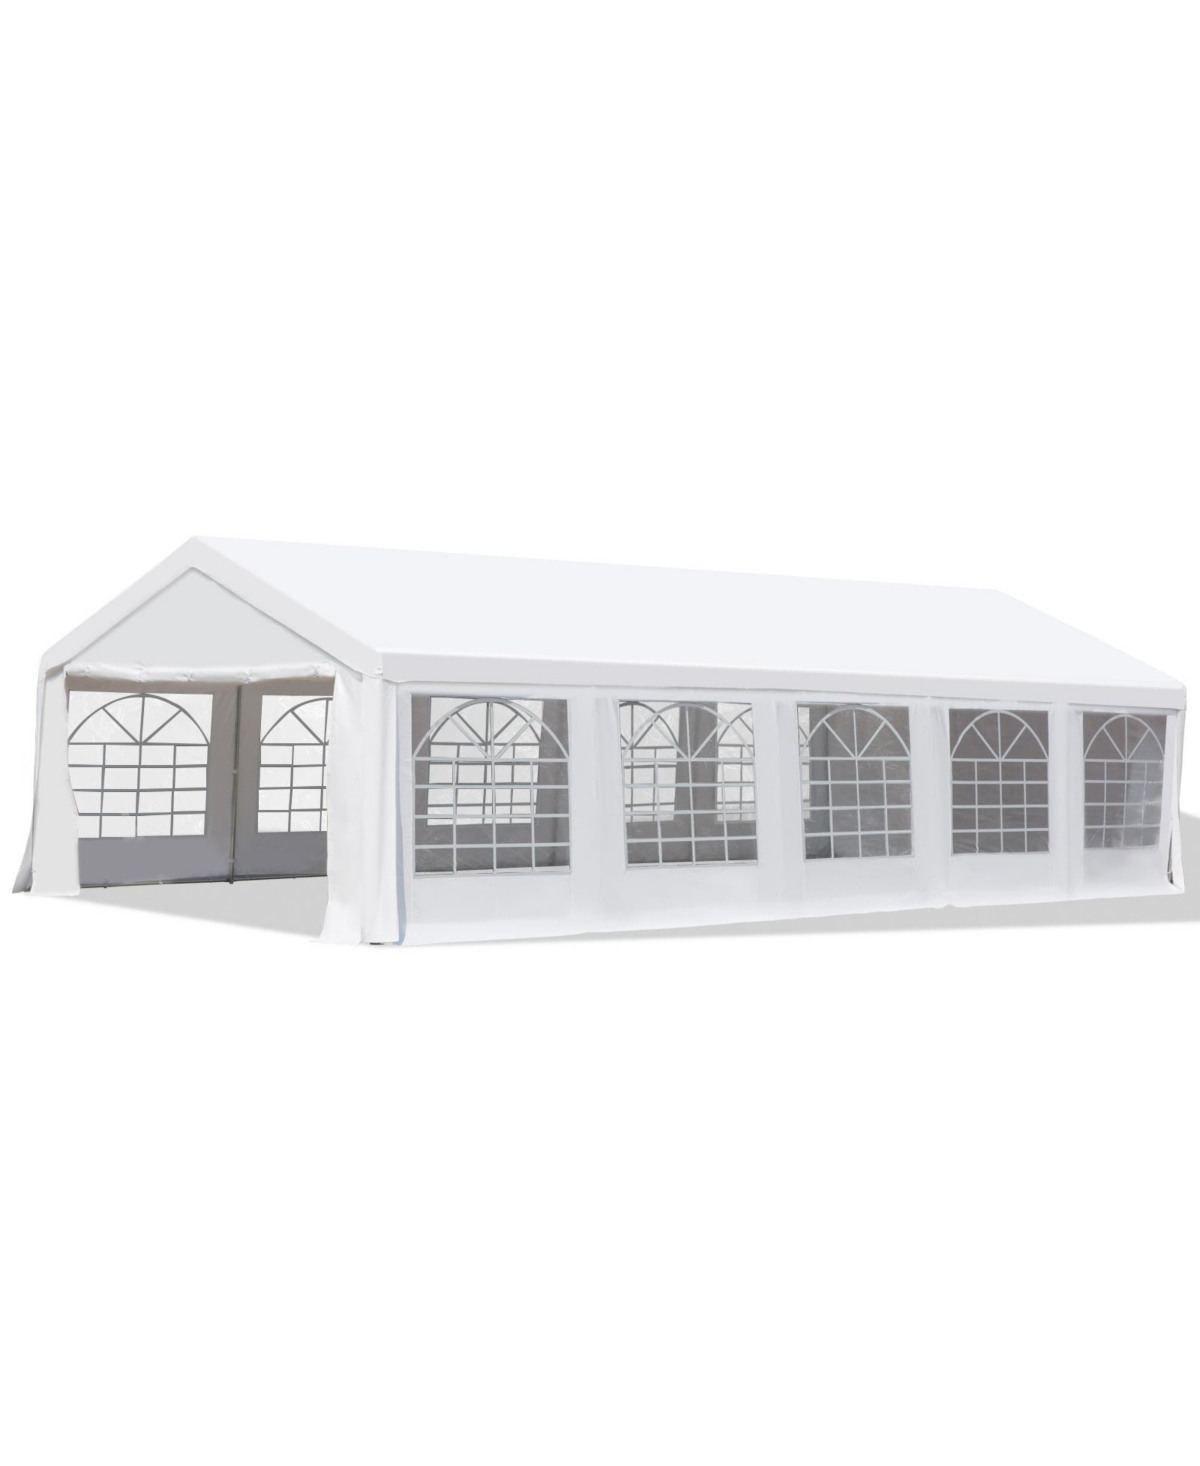 16' x 32' Large Outdoor Carport Canopy Party Tent with Removable Protective Sidewalls & Versatile Uses, White - White